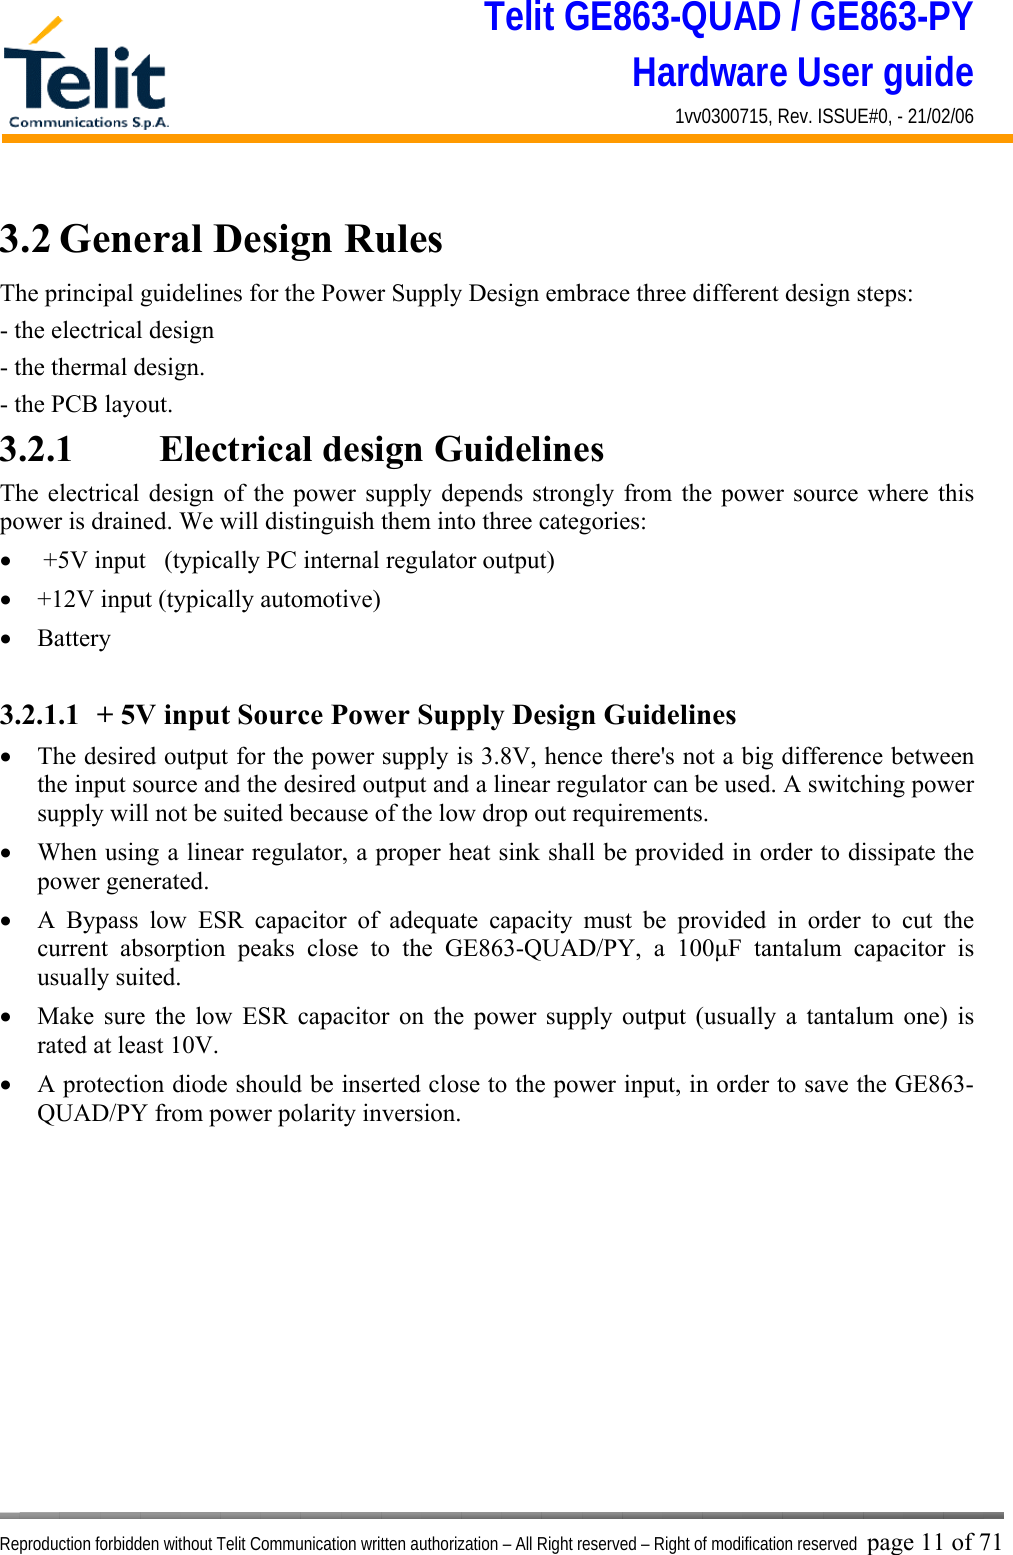 Telit GE863-QUAD / GE863-PY Hardware User guide 1vv0300715, Rev. ISSUE#0, - 21/02/06    Reproduction forbidden without Telit Communication written authorization – All Right reserved – Right of modification reserved page 11 of 71 3.2 General Design Rules The principal guidelines for the Power Supply Design embrace three different design steps: - the electrical design - the thermal design. - the PCB layout. 3.2.1    Electrical design Guidelines The electrical design of the power supply depends strongly from the power source where this power is drained. We will distinguish them into three categories: •   +5V input   (typically PC internal regulator output) •  +12V input (typically automotive) •  Battery  3.2.1.1  + 5V input Source Power Supply Design Guidelines •  The desired output for the power supply is 3.8V, hence there&apos;s not a big difference between the input source and the desired output and a linear regulator can be used. A switching power supply will not be suited because of the low drop out requirements. •  When using a linear regulator, a proper heat sink shall be provided in order to dissipate the power generated. •  A Bypass low ESR capacitor of adequate capacity must be provided in order to cut the current absorption peaks close to the GE863-QUAD/PY, a 100μF tantalum capacitor is usually suited. •  Make sure the low ESR capacitor on the power supply output (usually a tantalum one) is rated at least 10V. •  A protection diode should be inserted close to the power input, in order to save the GE863-QUAD/PY from power polarity inversion. 